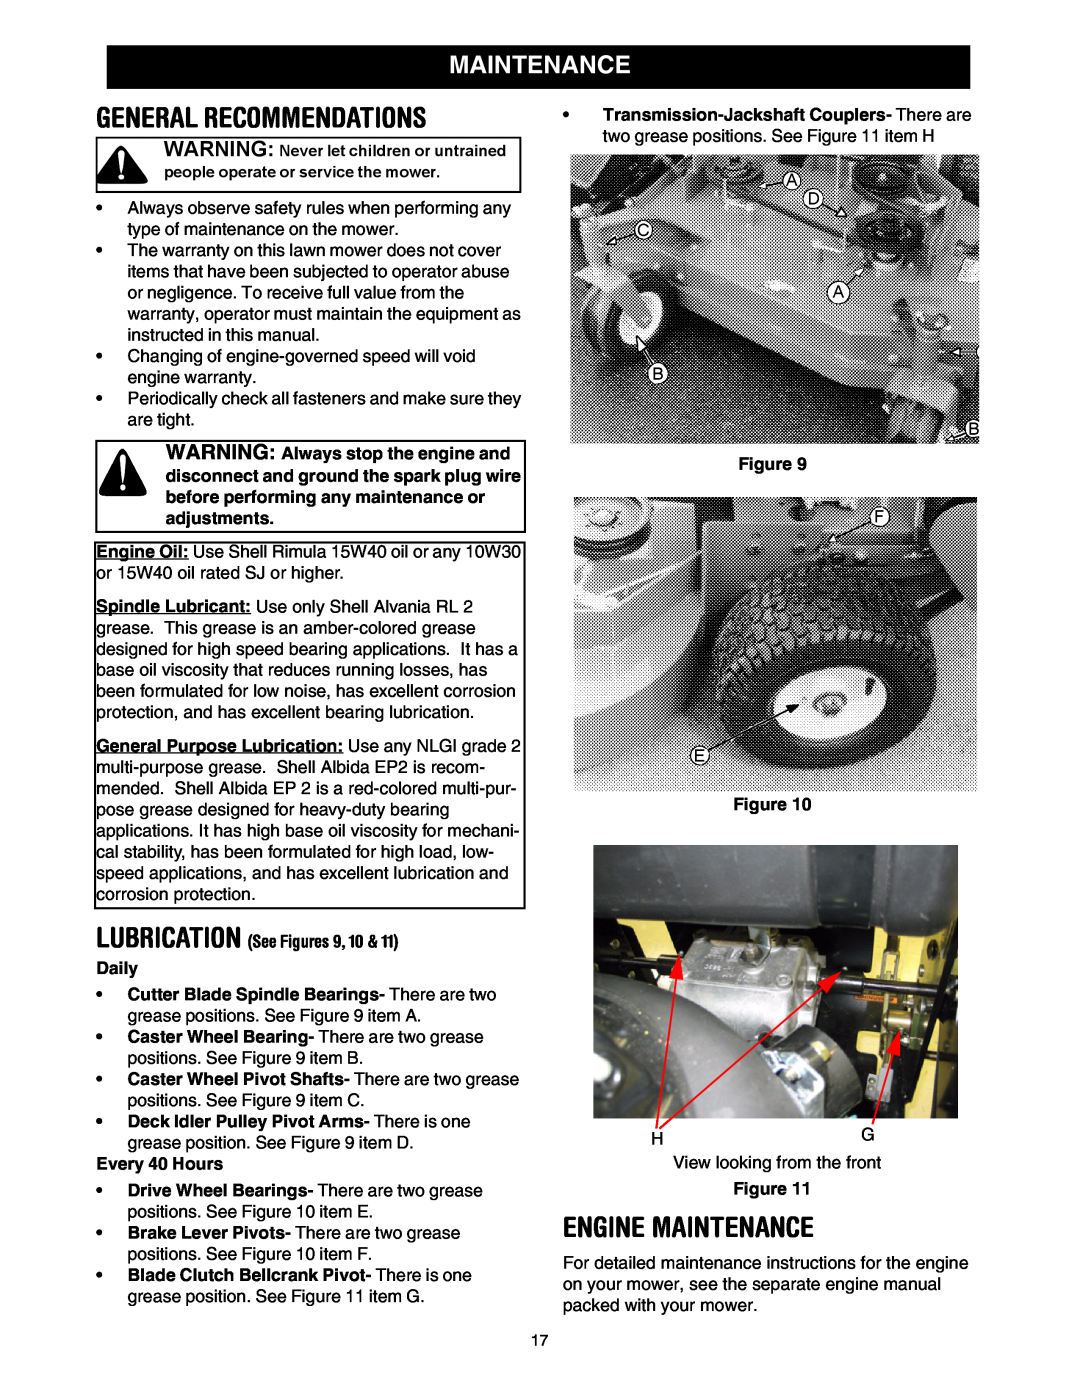 Cub Cadet G 1236 service manual General Recommendations, Engine Maintenance, Daily, Every 40 Hours 